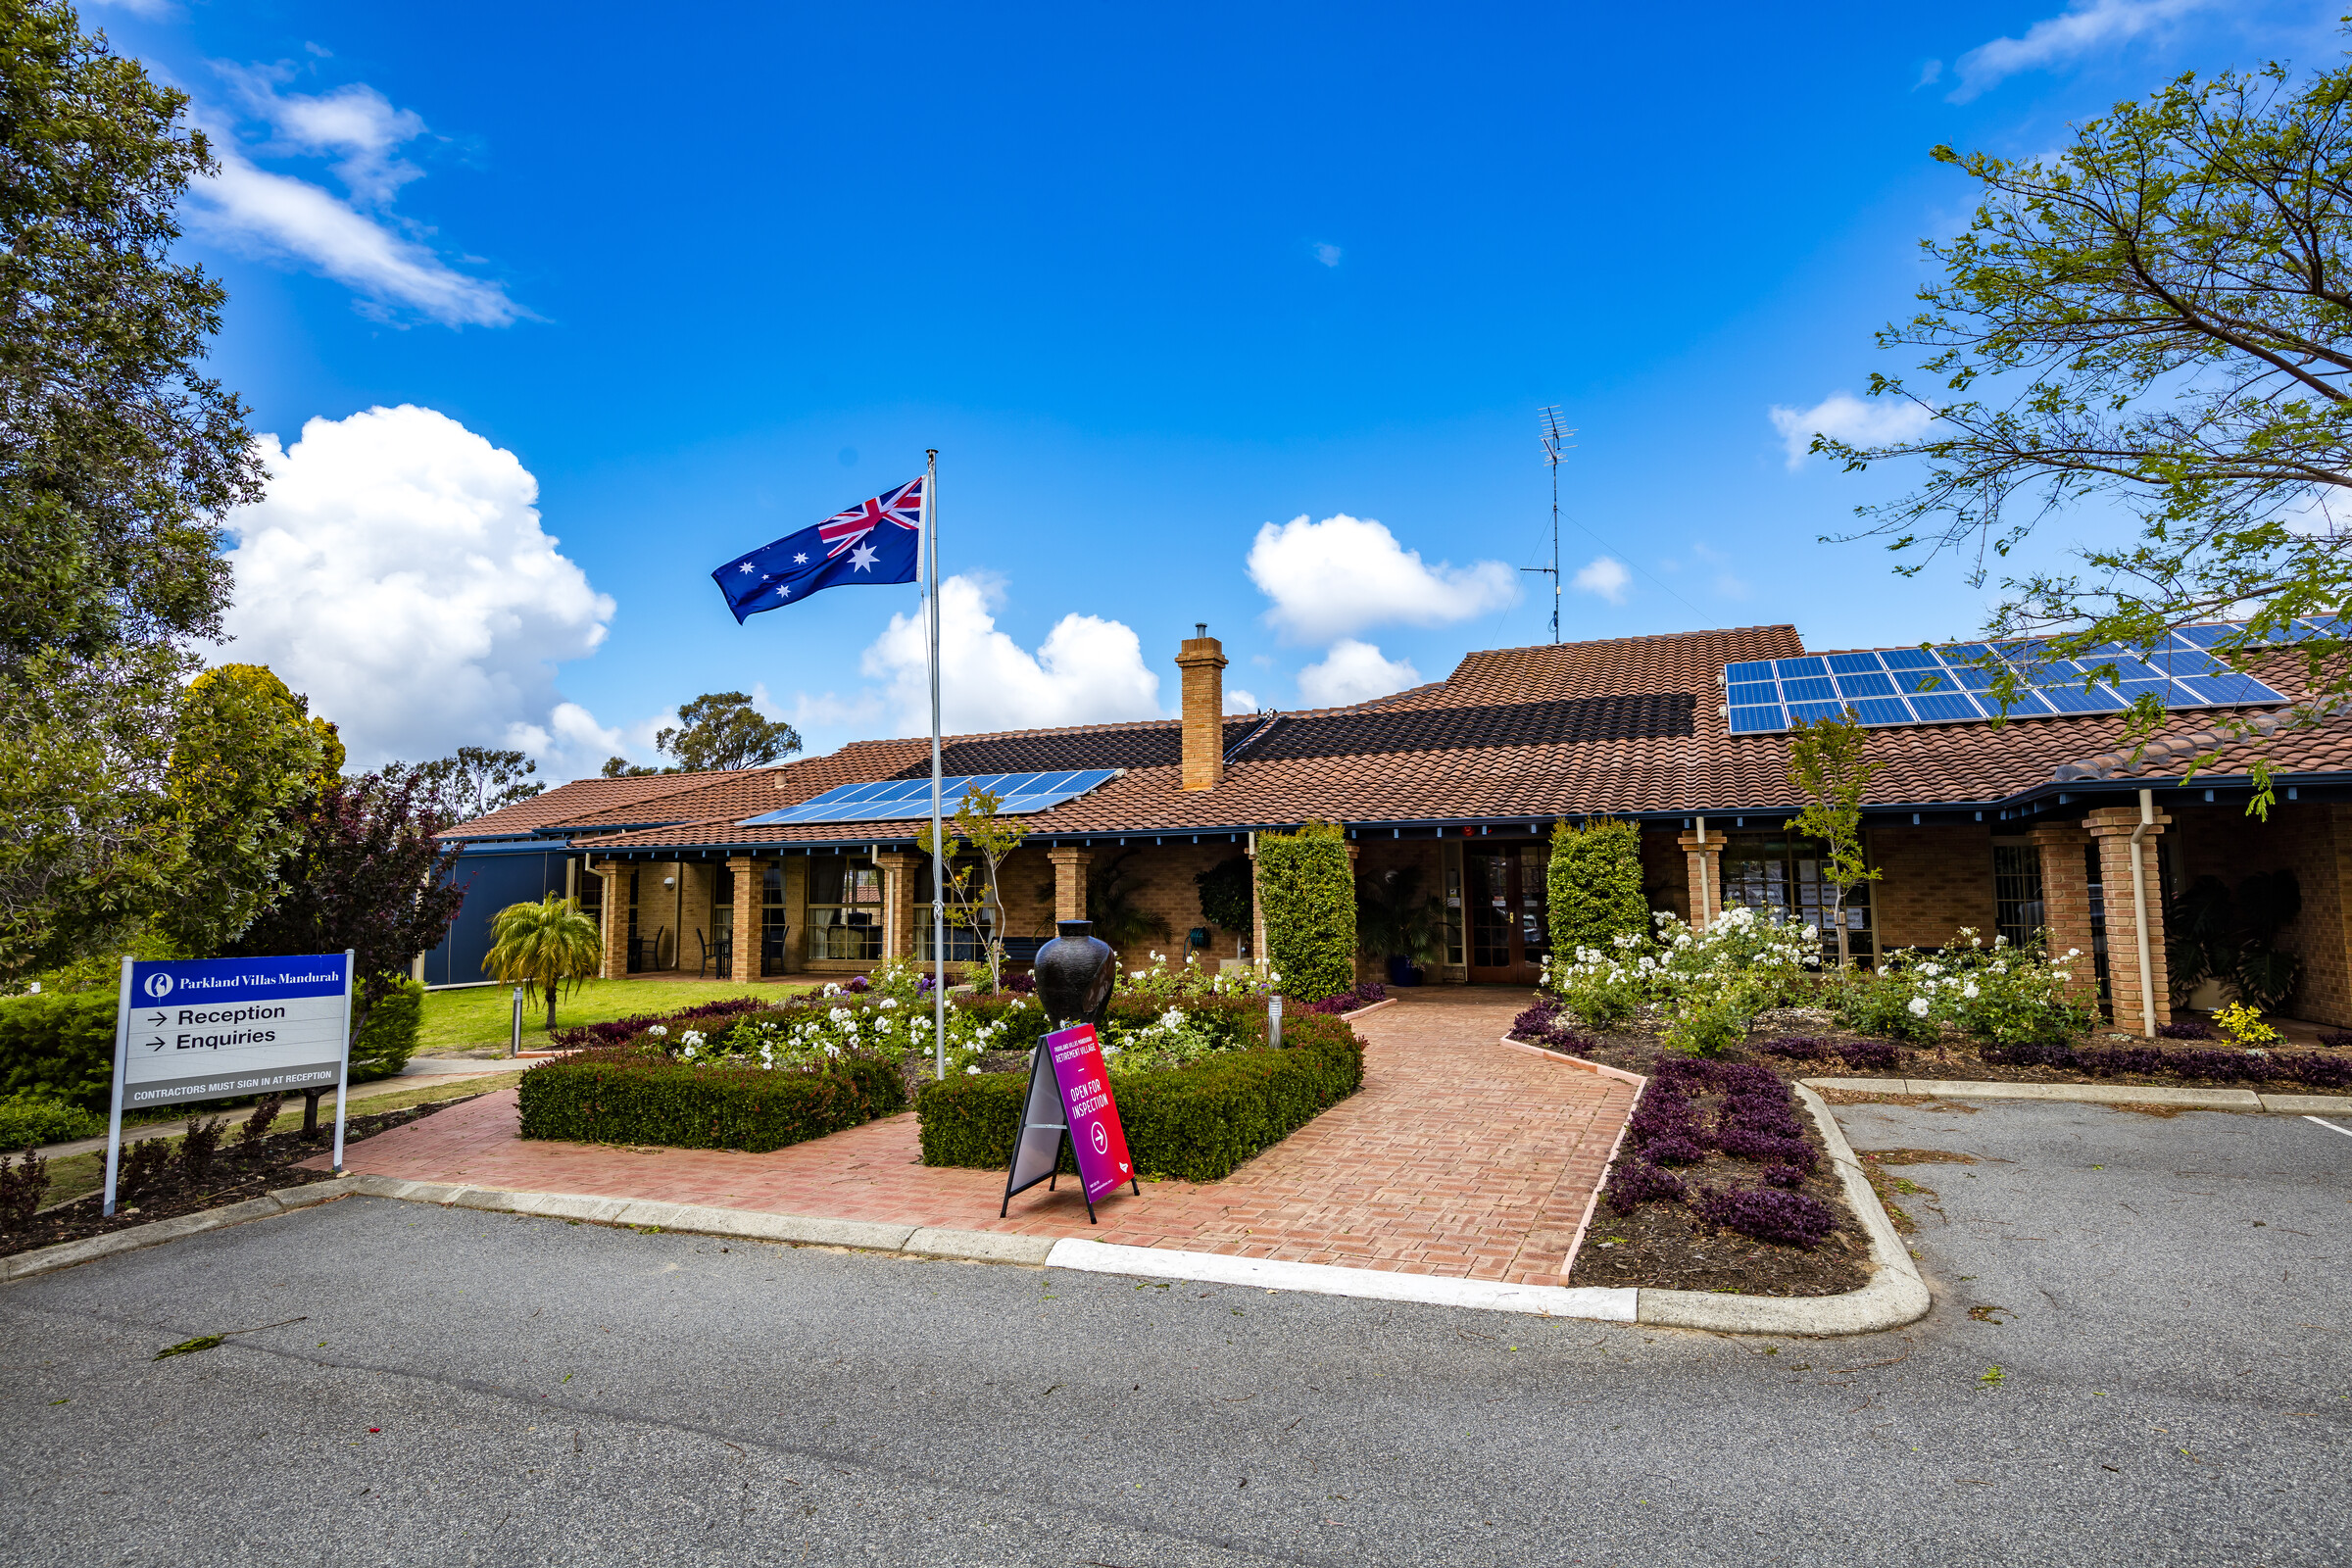 Parkland Villas Mandurah main entrance outside with landscaped garden, road and flag pole, solar panels on roof